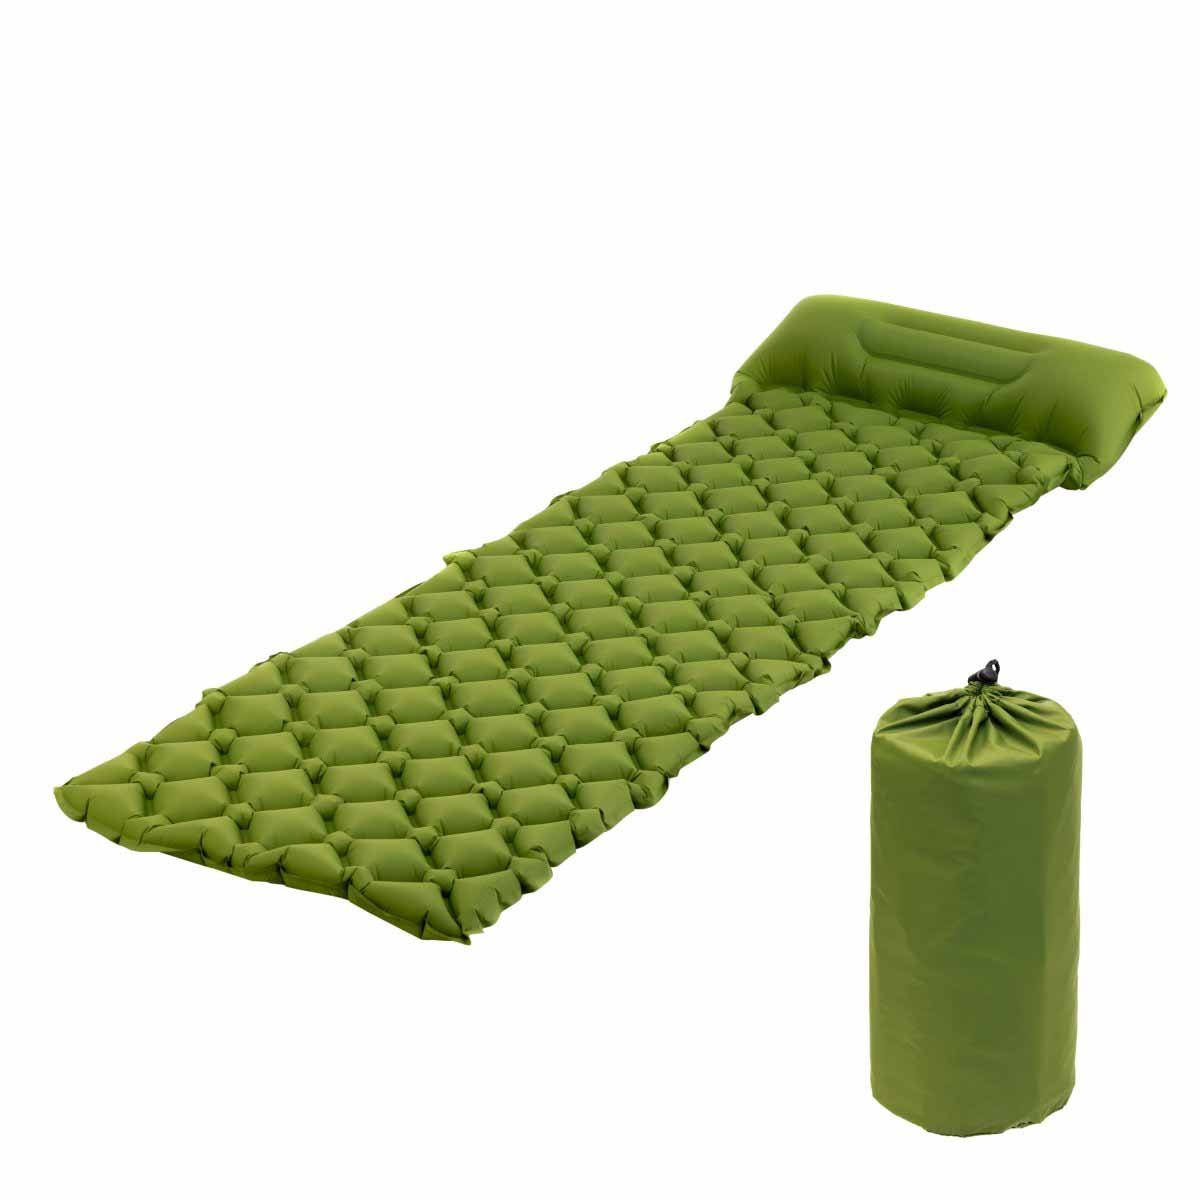 2-inch Waterproof Camping Self Inflating Sleeping Pad with Carry Bag, Olive Green